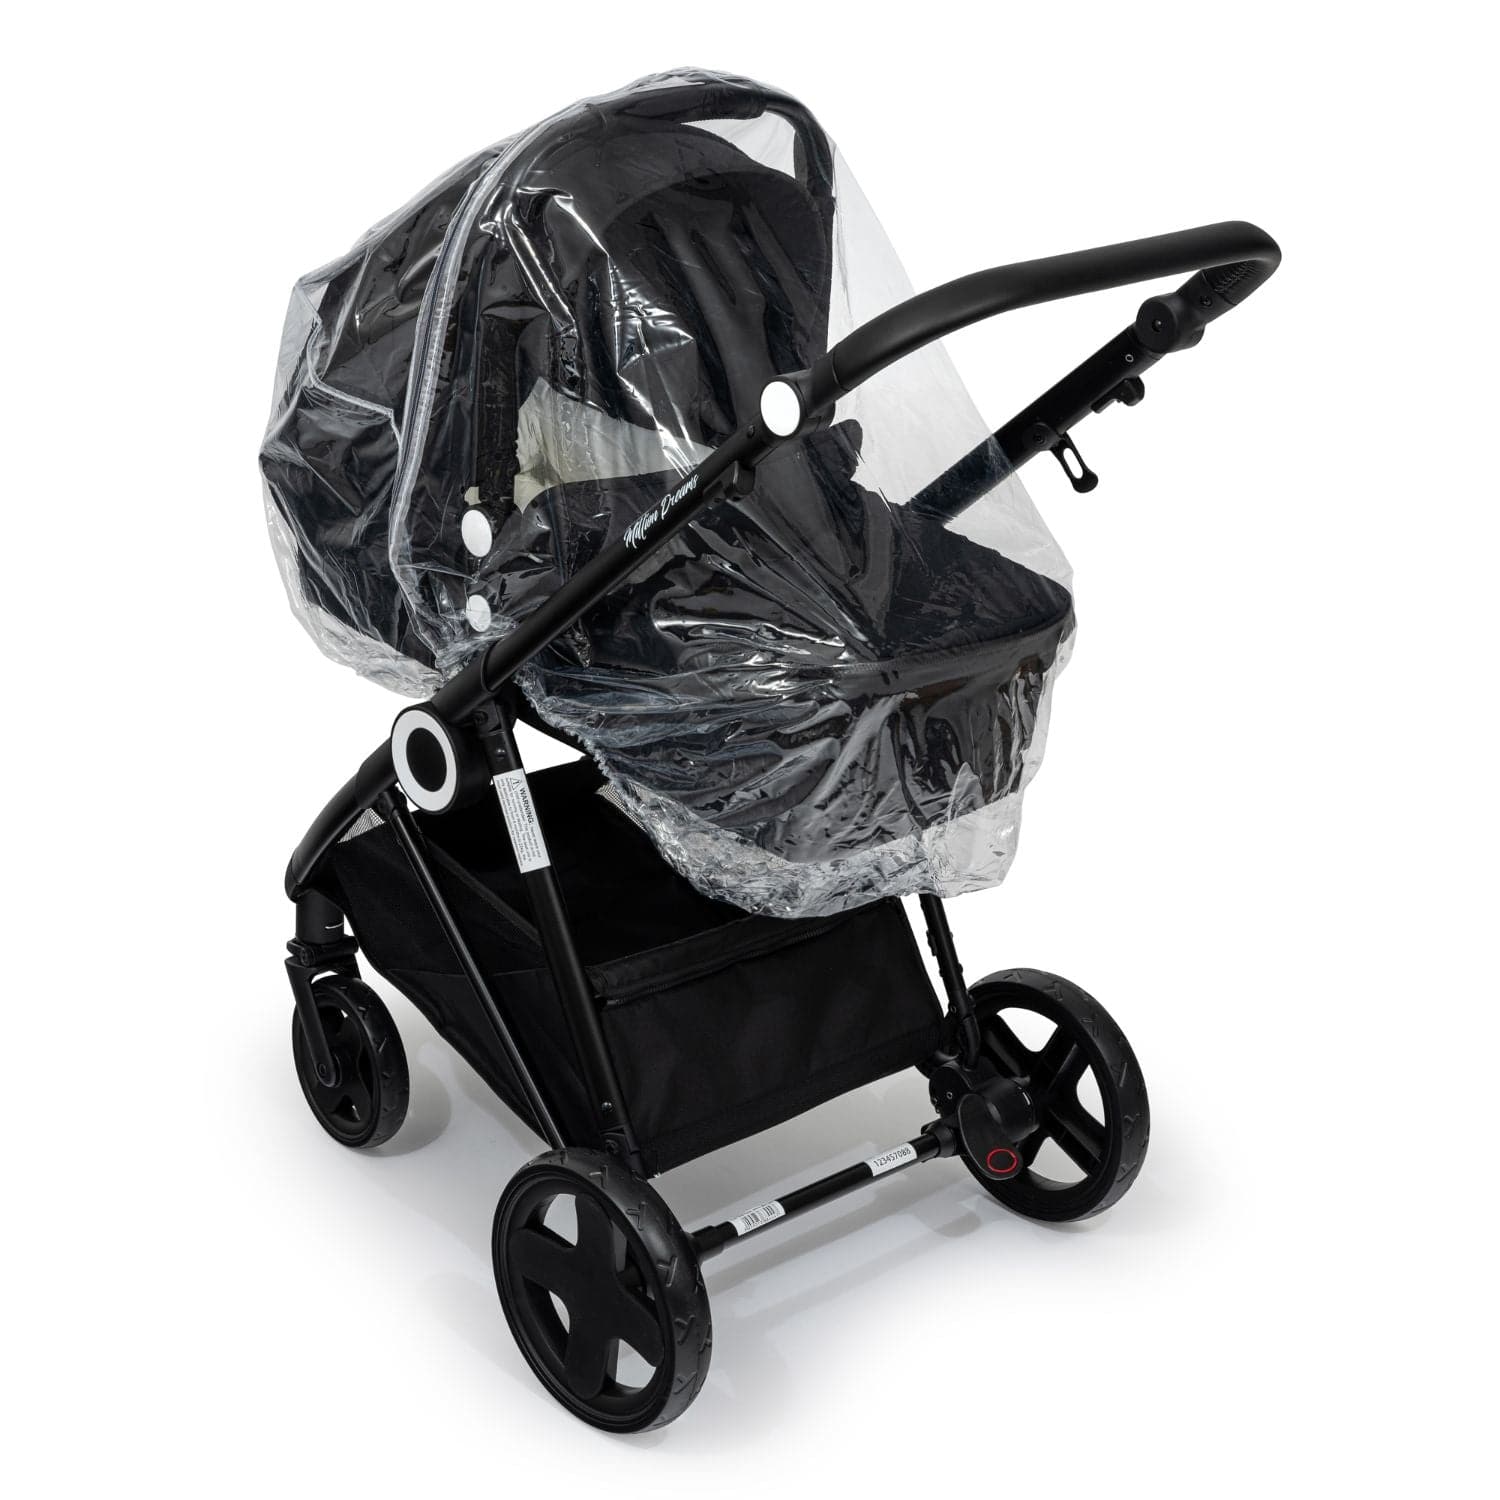 Carrycot Raincover Compatible With XTS - Fits All Models - For Your Little One